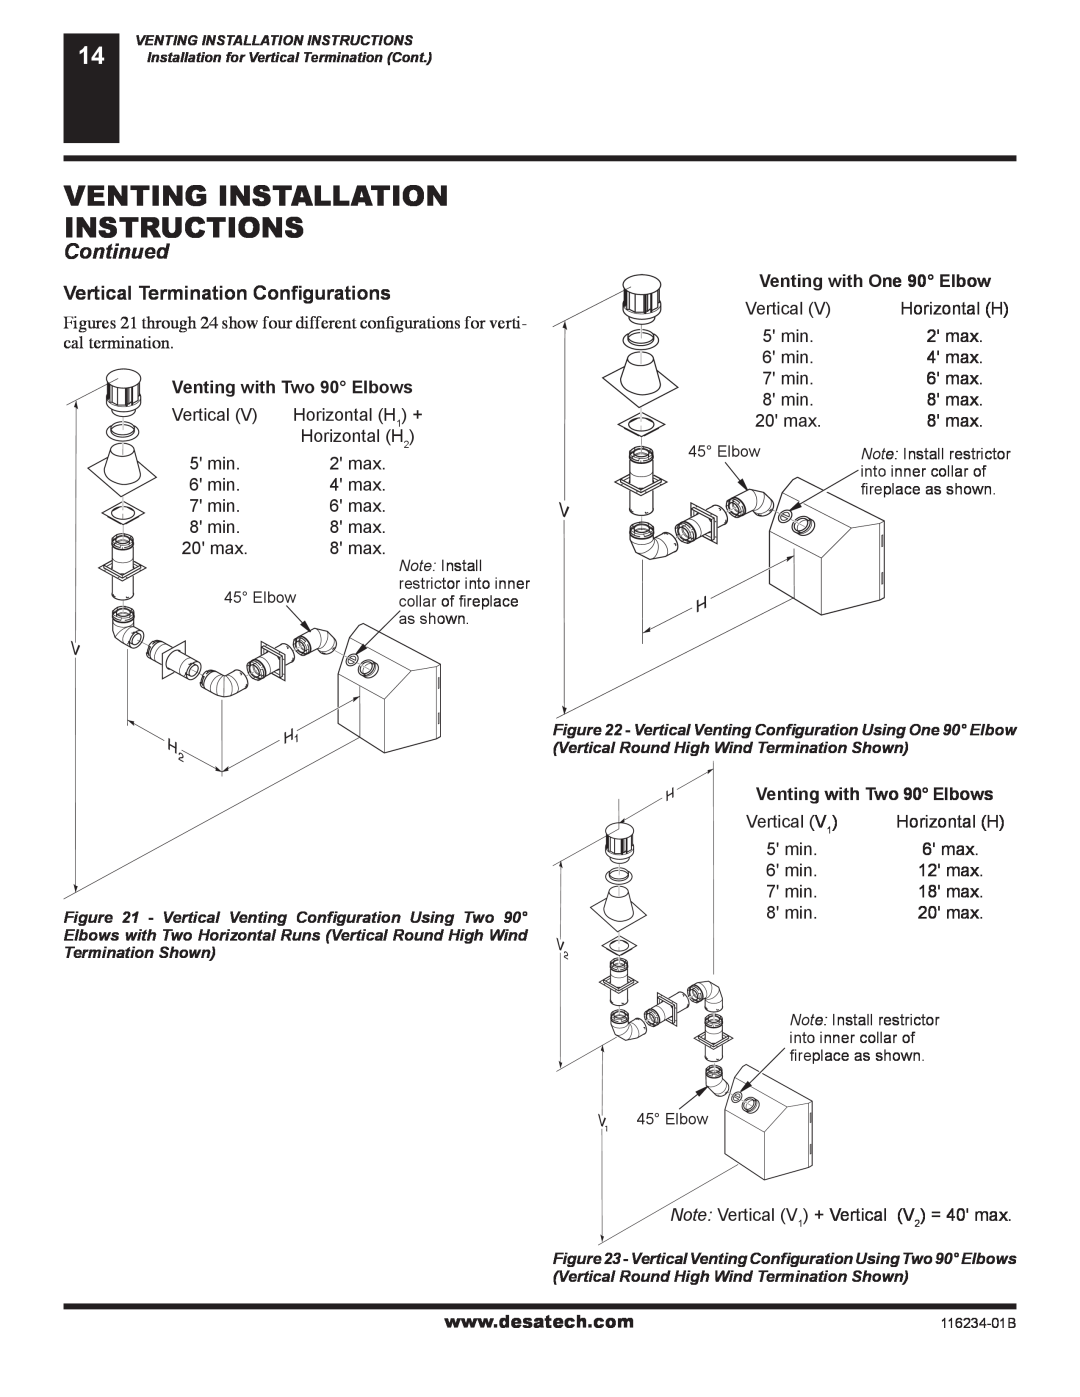 Desa (V)TC36PE Venting Installation Instructions, Continued, Vertical Termination Conﬁgurations, Venting with One 90 Elbow 